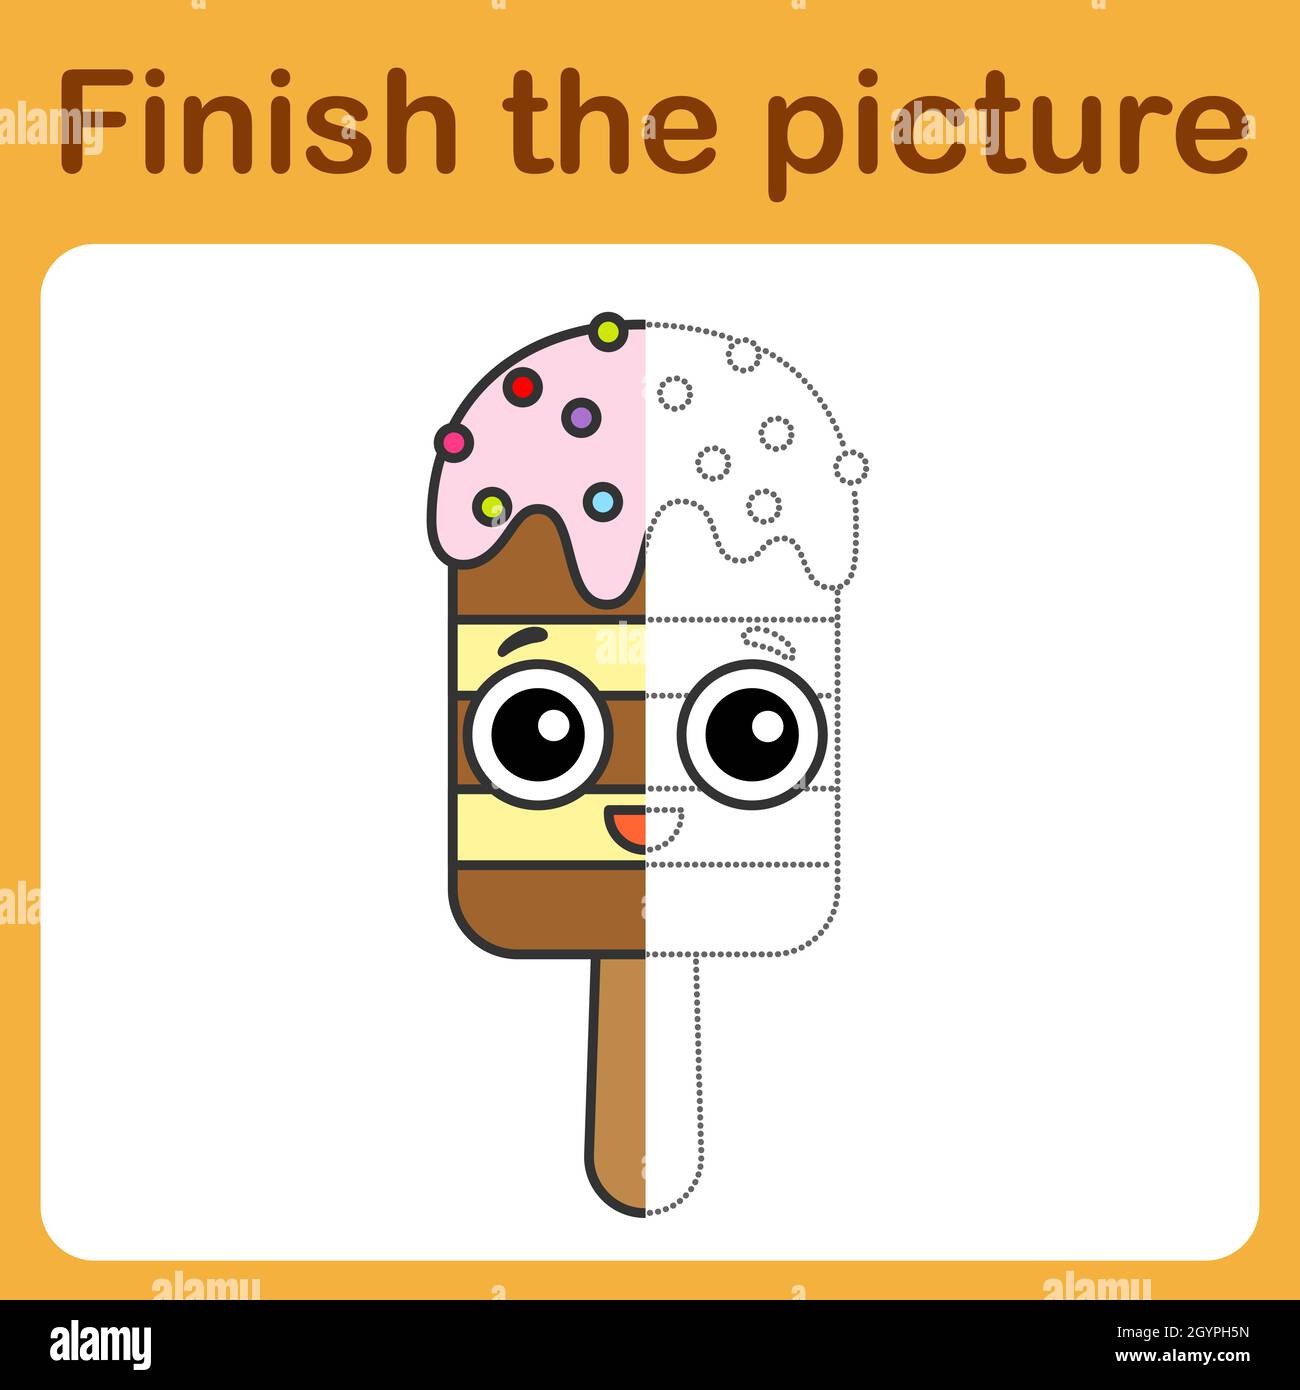 Ice Cream Cone Drawing - How To Draw An Ice Cream Cone Step By Step